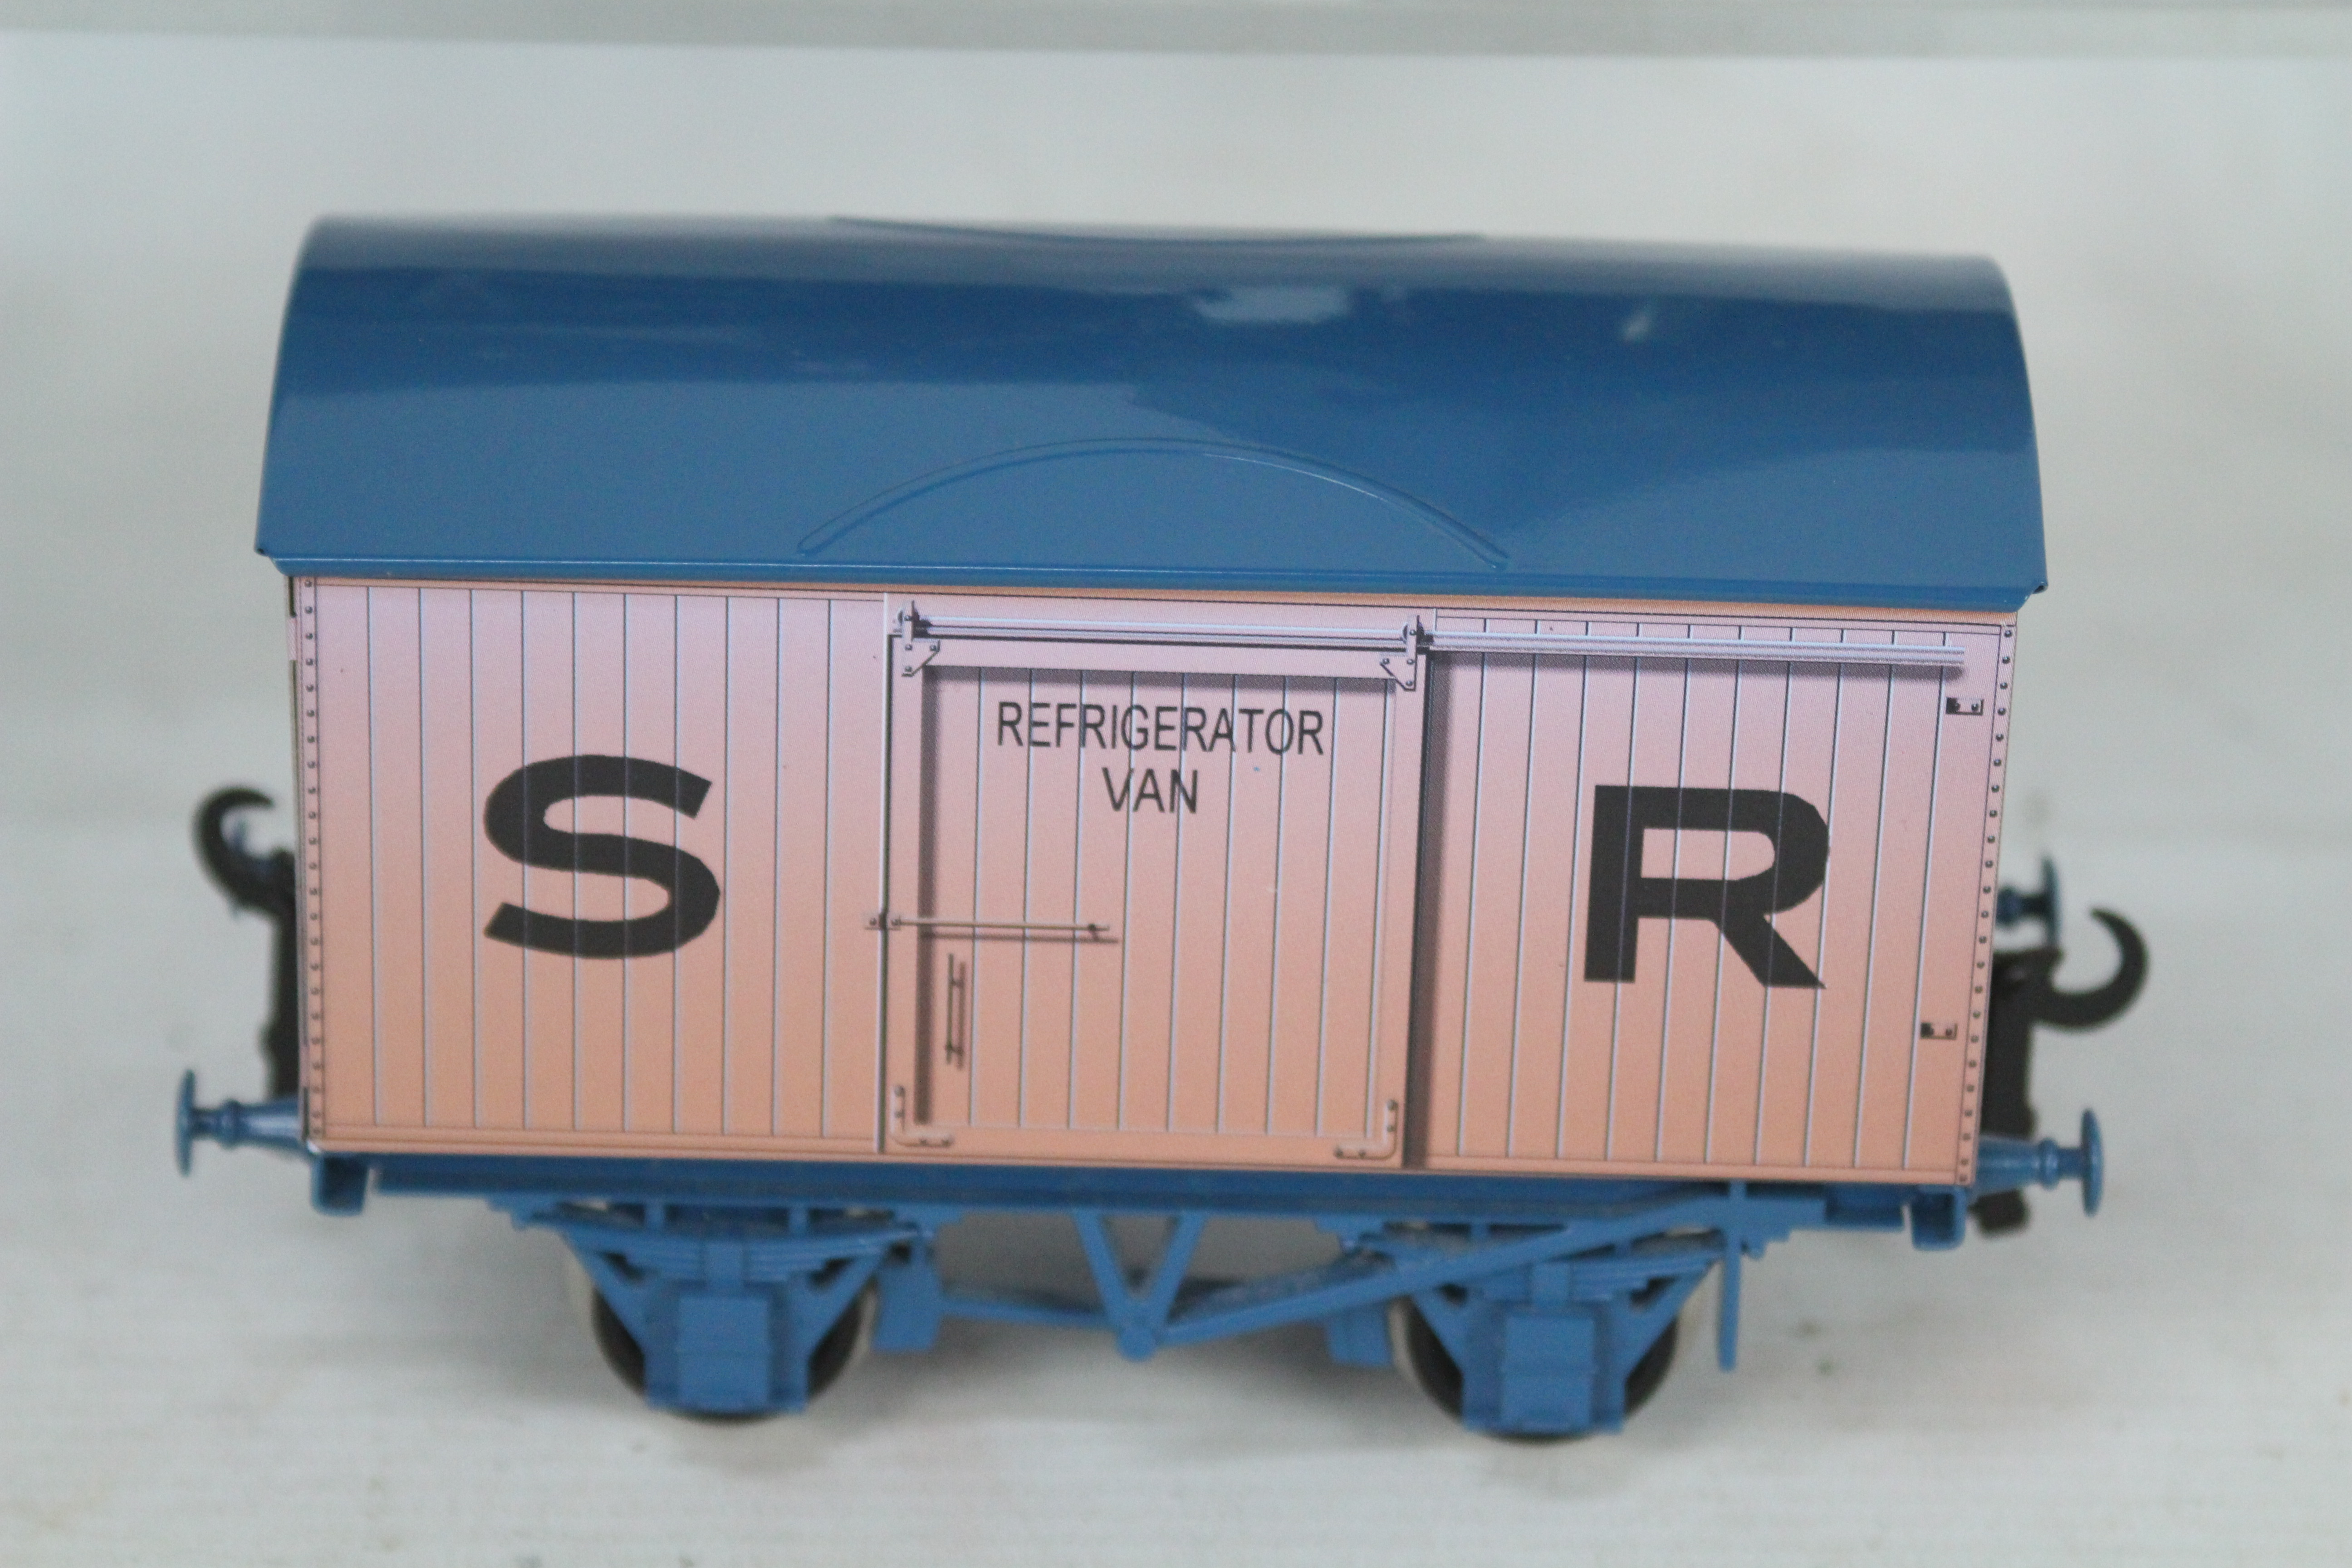 ACE Trains - Three unboxed ACE Trains O gauge tinplate wagons. - Image 3 of 3